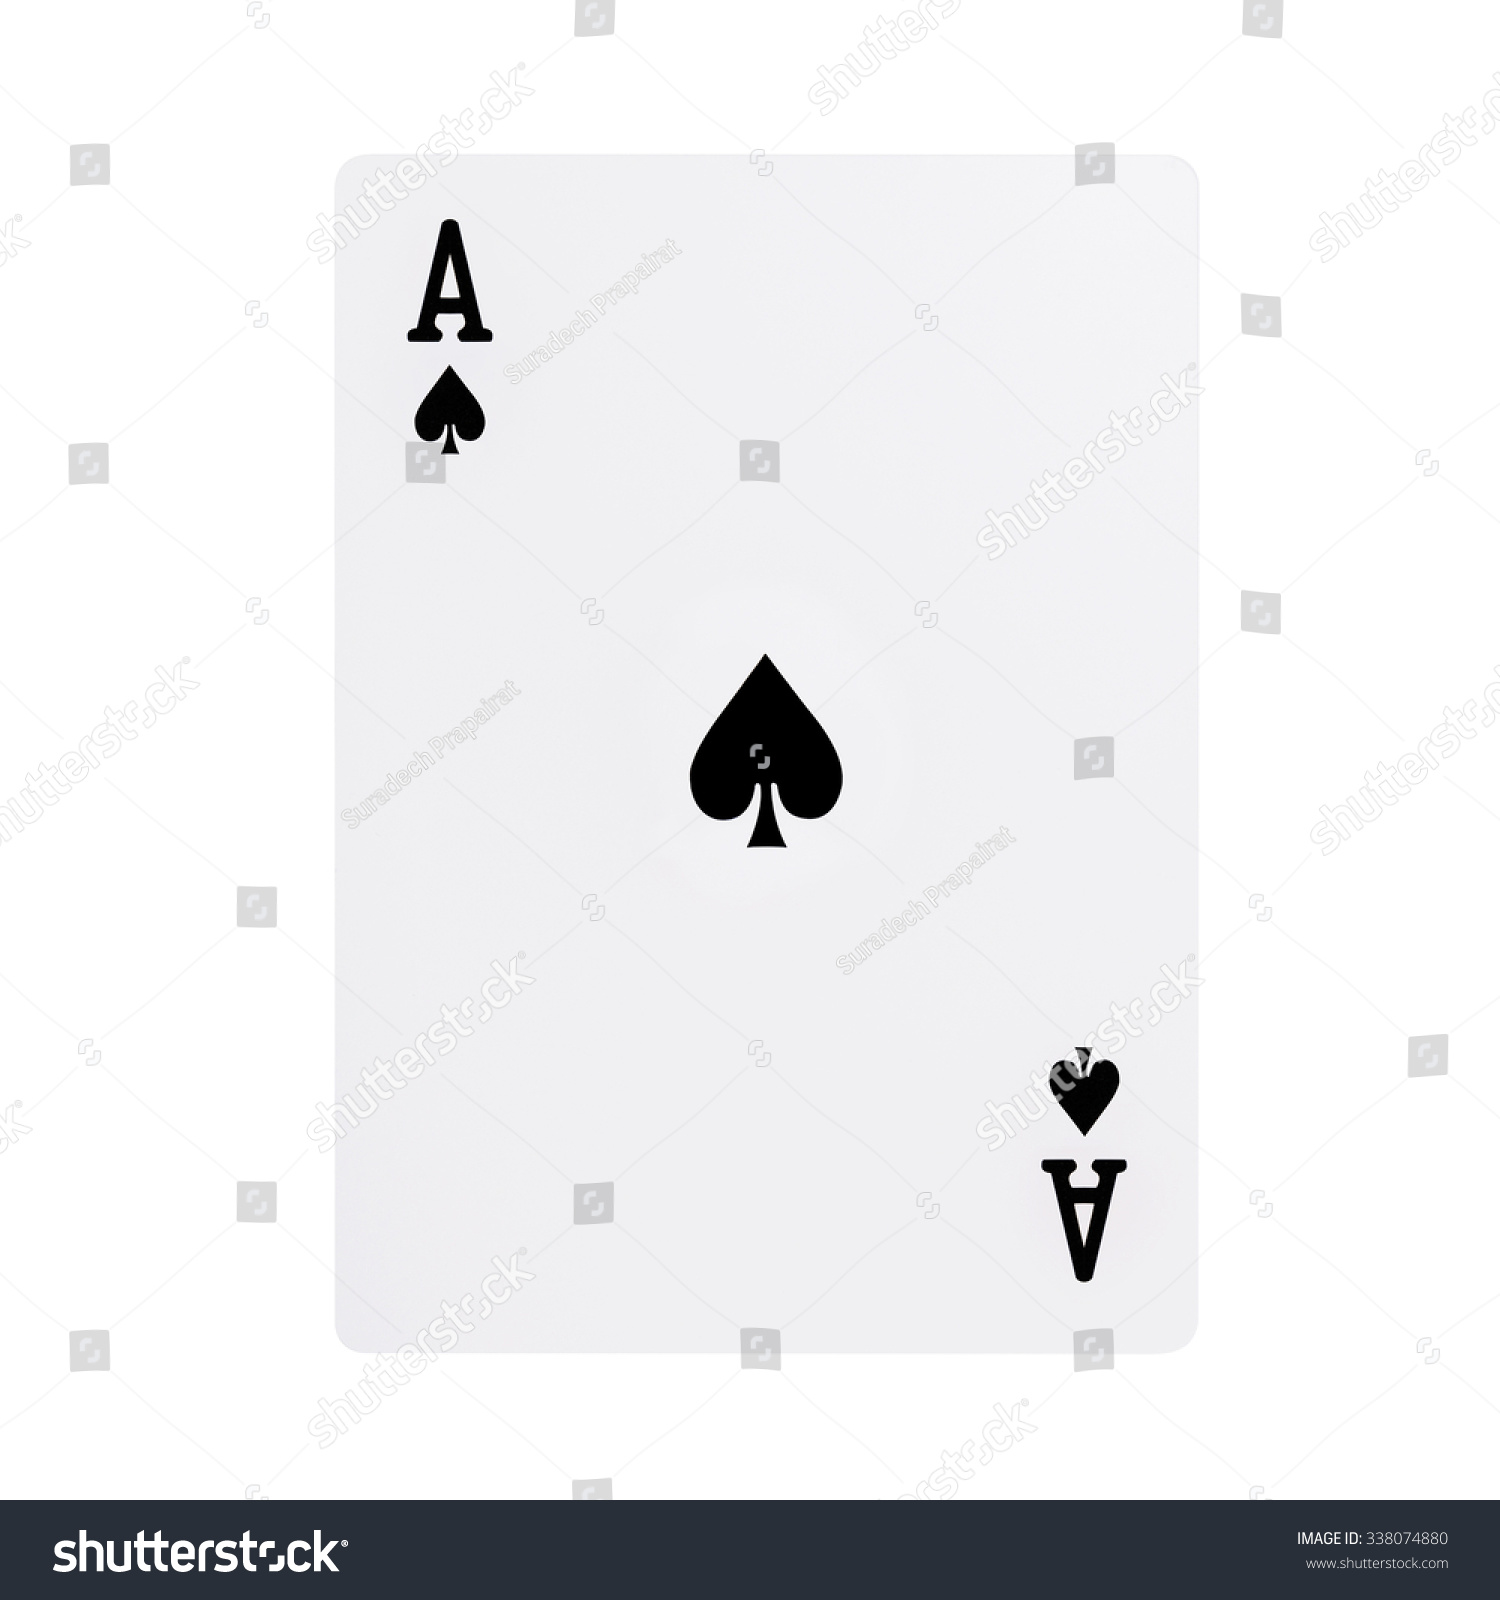 Ace of spades playing card, isolated on white background. #338074880